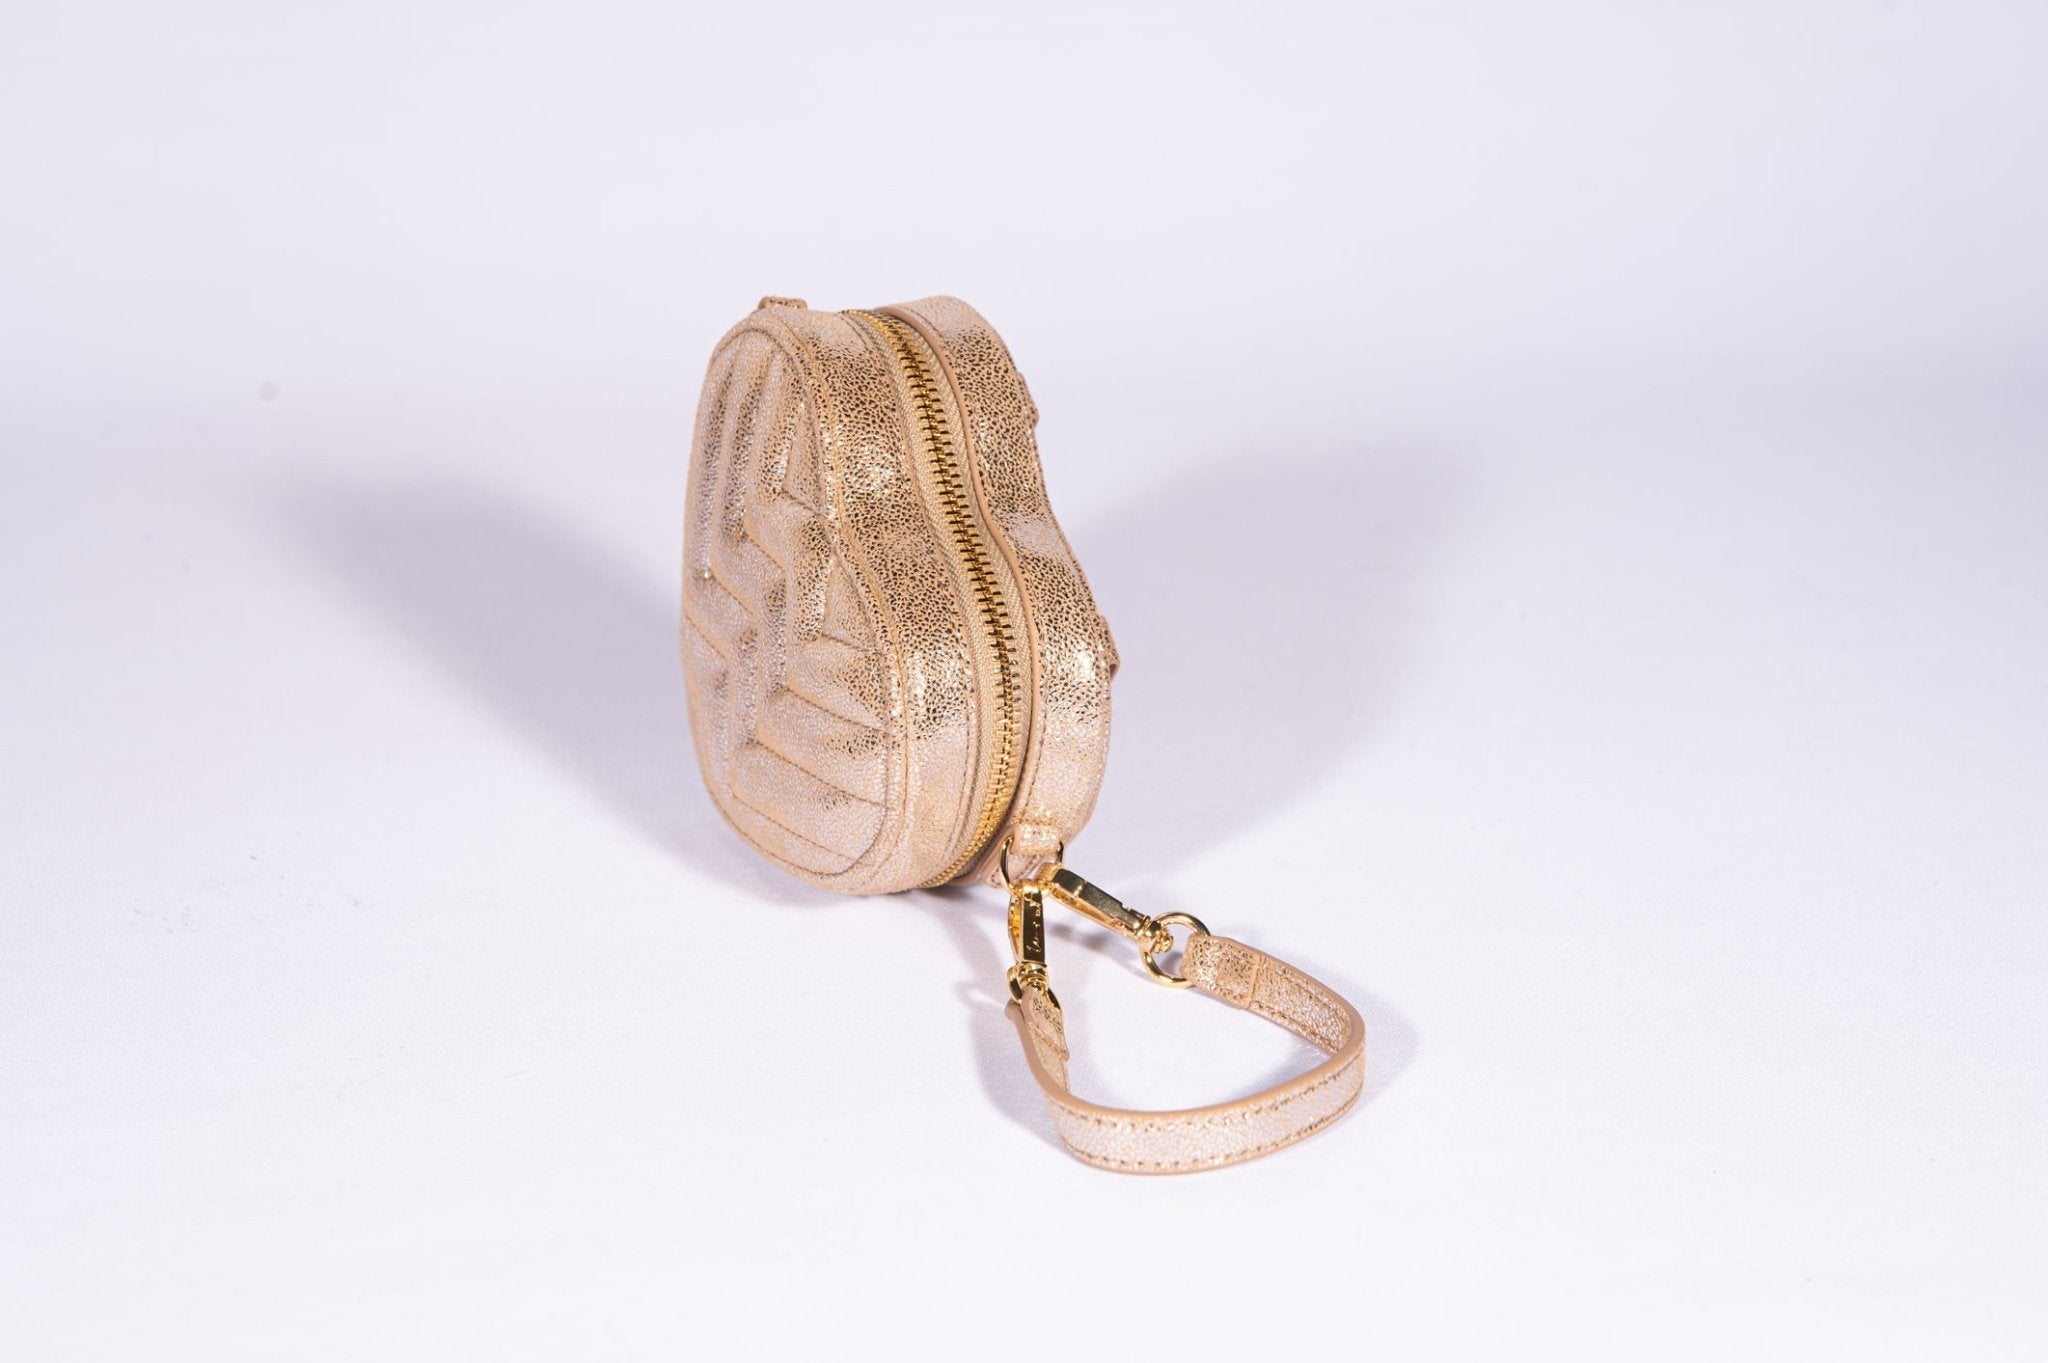 Leather Heart Bag Champagne by Weat - Peggell